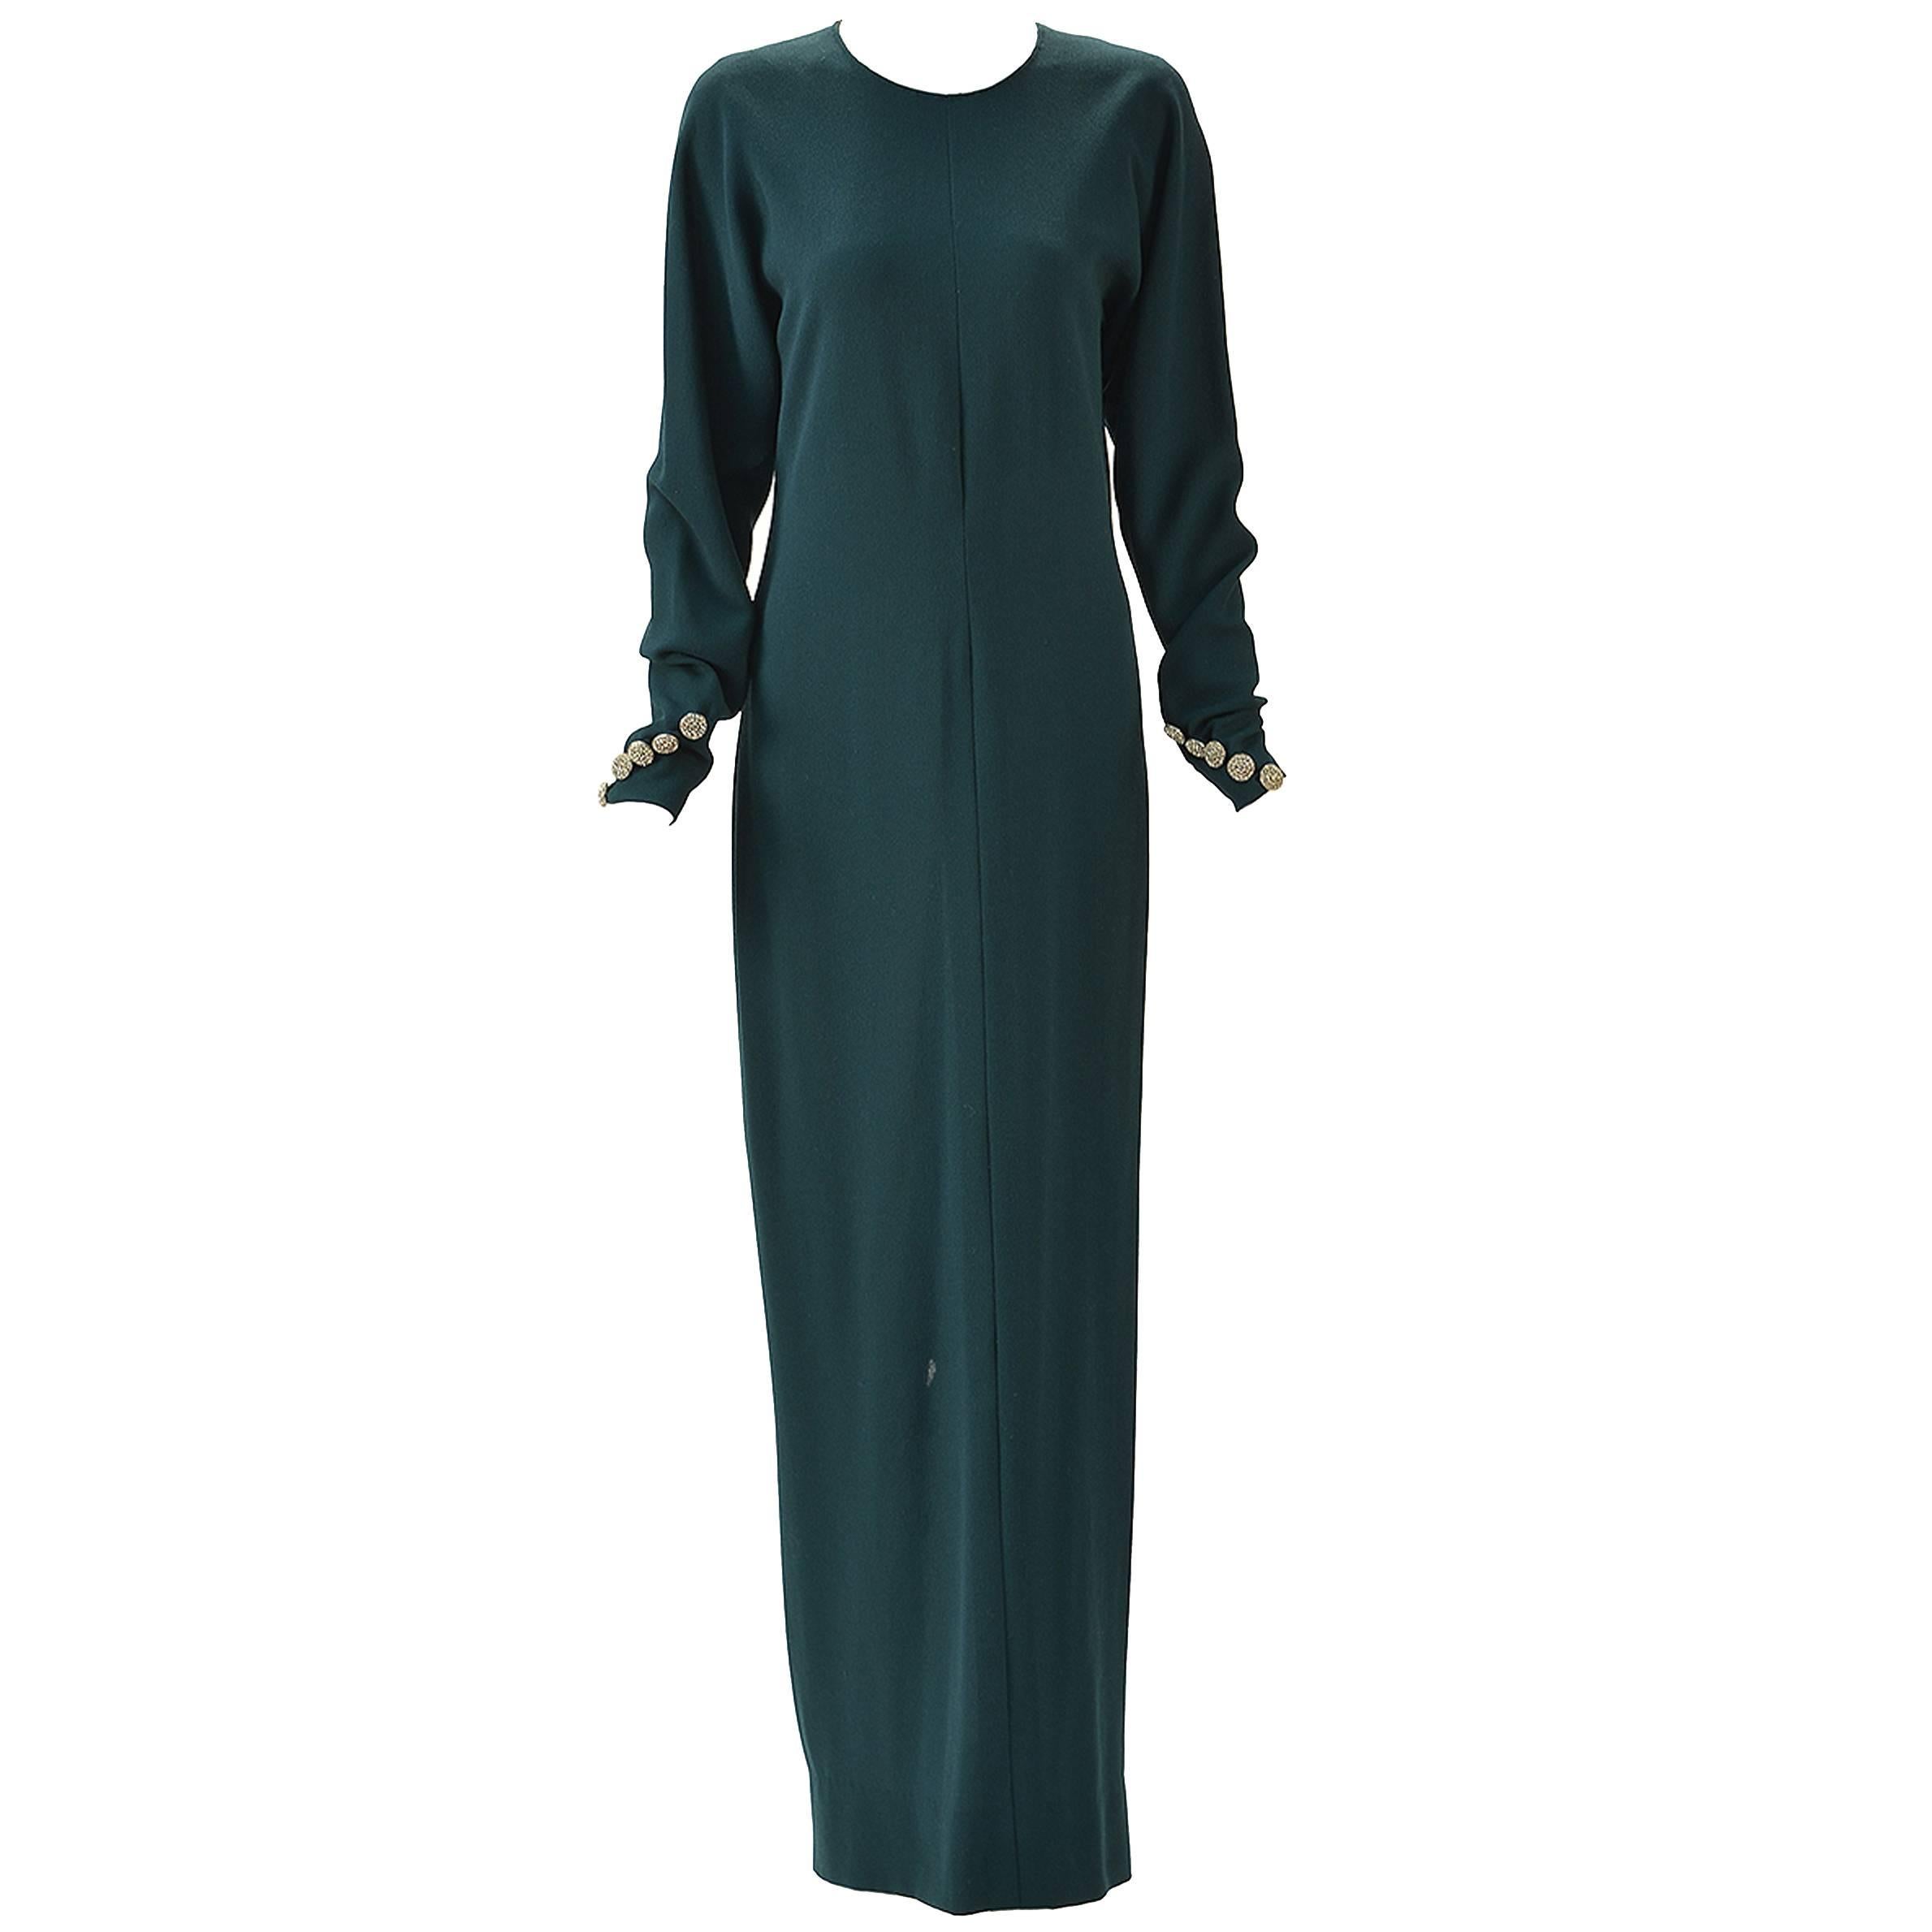 This gorgeous and glamorous Galanos long green dress is the elegance you need in your life. Scoop neck with long bat-wing sleeves are buttoned at cuffs with five silver rhinestone buttons. Open back tying at neck. Gathered at waist with back zipper.